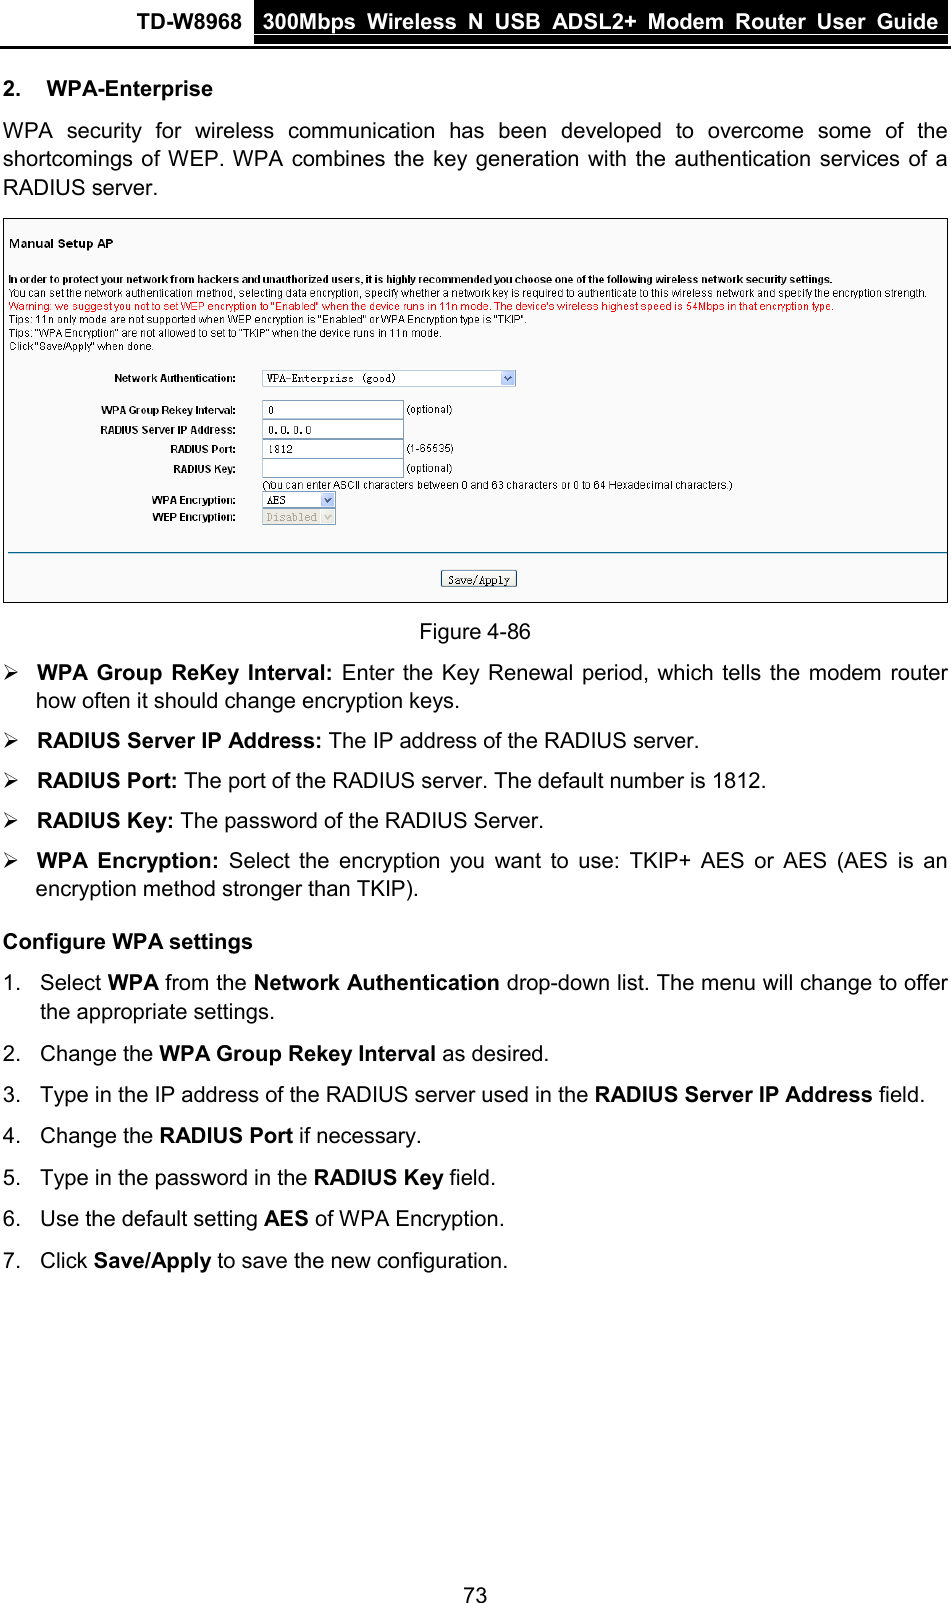 TD-W8968 300Mbps Wireless  N  USB ADSL2+ Modem Router  User Guide  2. WPA-Enterprise WPA security for wireless communication has been developed to overcome some of the shortcomings of WEP. WPA combines the key generation with the authentication services of a RADIUS server.  Figure 4-86  WPA Group ReKey Interval: Enter the Key Renewal period, which tells the modem router how often it should change encryption keys.  RADIUS Server IP Address: The IP address of the RADIUS server.  RADIUS Port: The port of the RADIUS server. The default number is 1812.  RADIUS Key: The password of the RADIUS Server.  WPA Encryption: Select the encryption  you want to use:  TKIP+  AES or AES  (AES is an encryption method stronger than TKIP). Configure WPA settings 1. Select WPA from the Network Authentication drop-down list. The menu will change to offer the appropriate settings. 2. Change the WPA Group Rekey Interval as desired. 3. Type in the IP address of the RADIUS server used in the RADIUS Server IP Address field. 4. Change the RADIUS Port if necessary. 5. Type in the password in the RADIUS Key field. 6. Use the default setting AES of WPA Encryption. 7. Click Save/Apply to save the new configuration. 73 